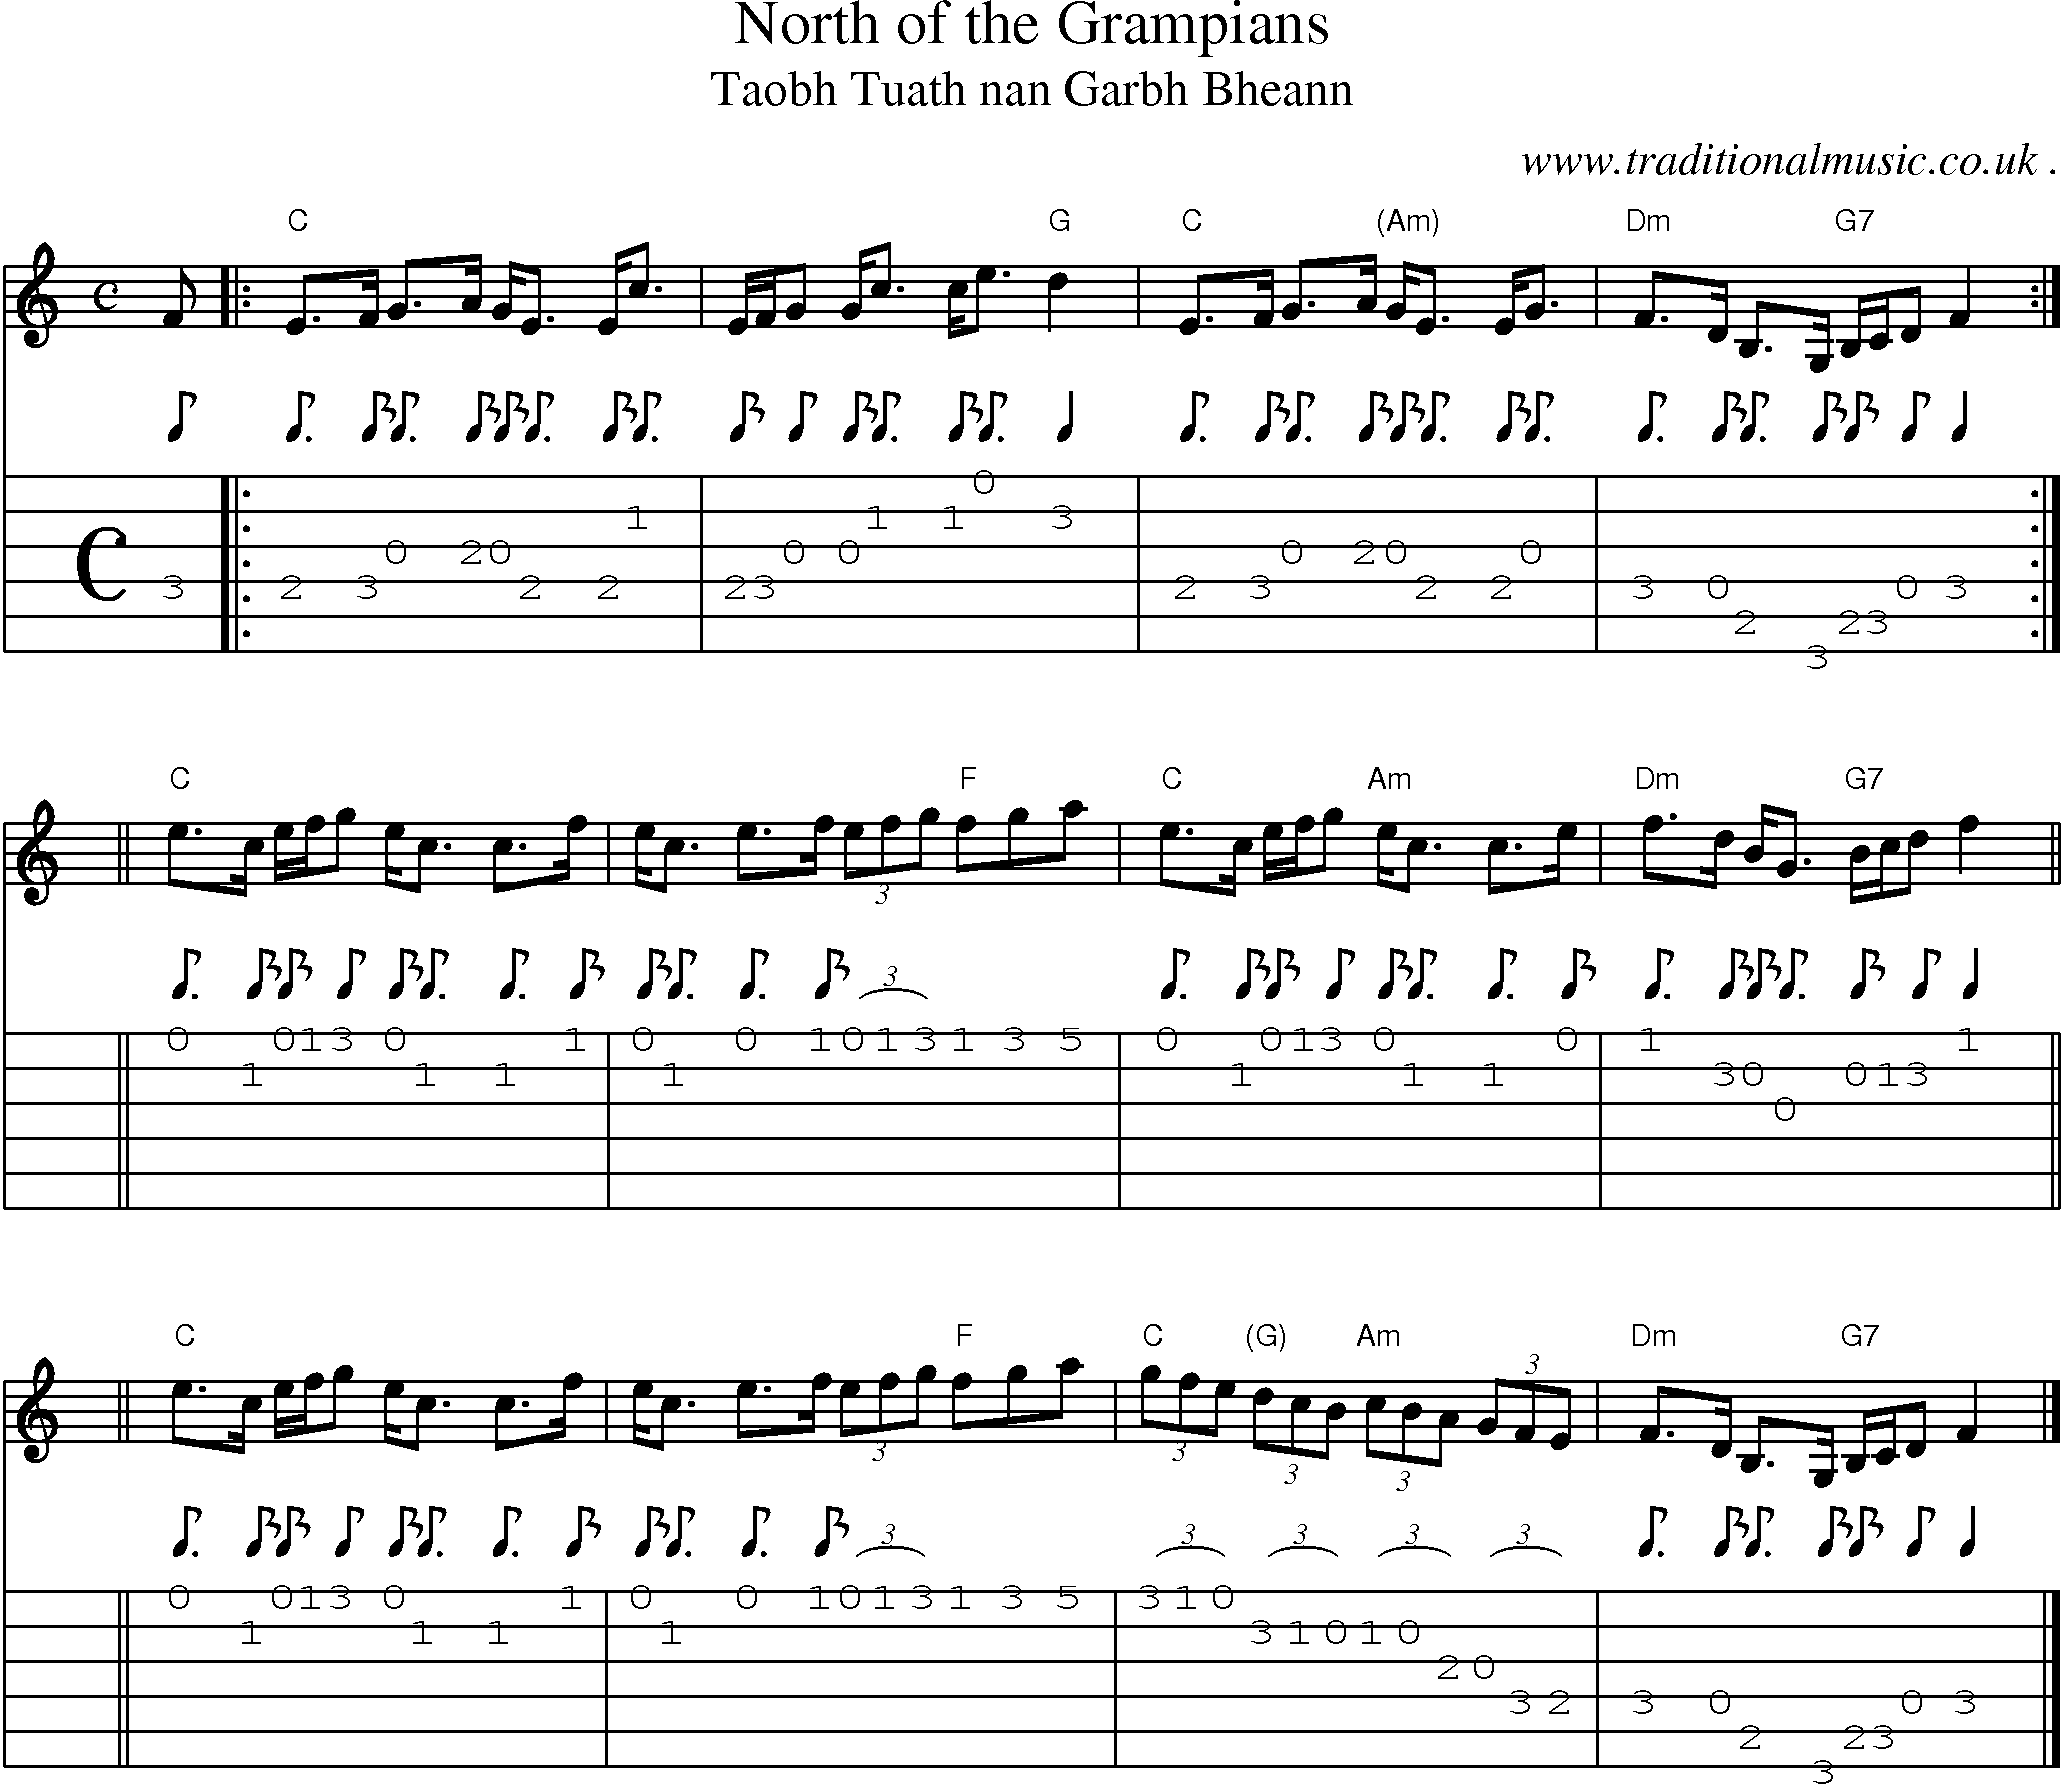 Sheet-music  score, Chords and Guitar Tabs for North Of The Grampians